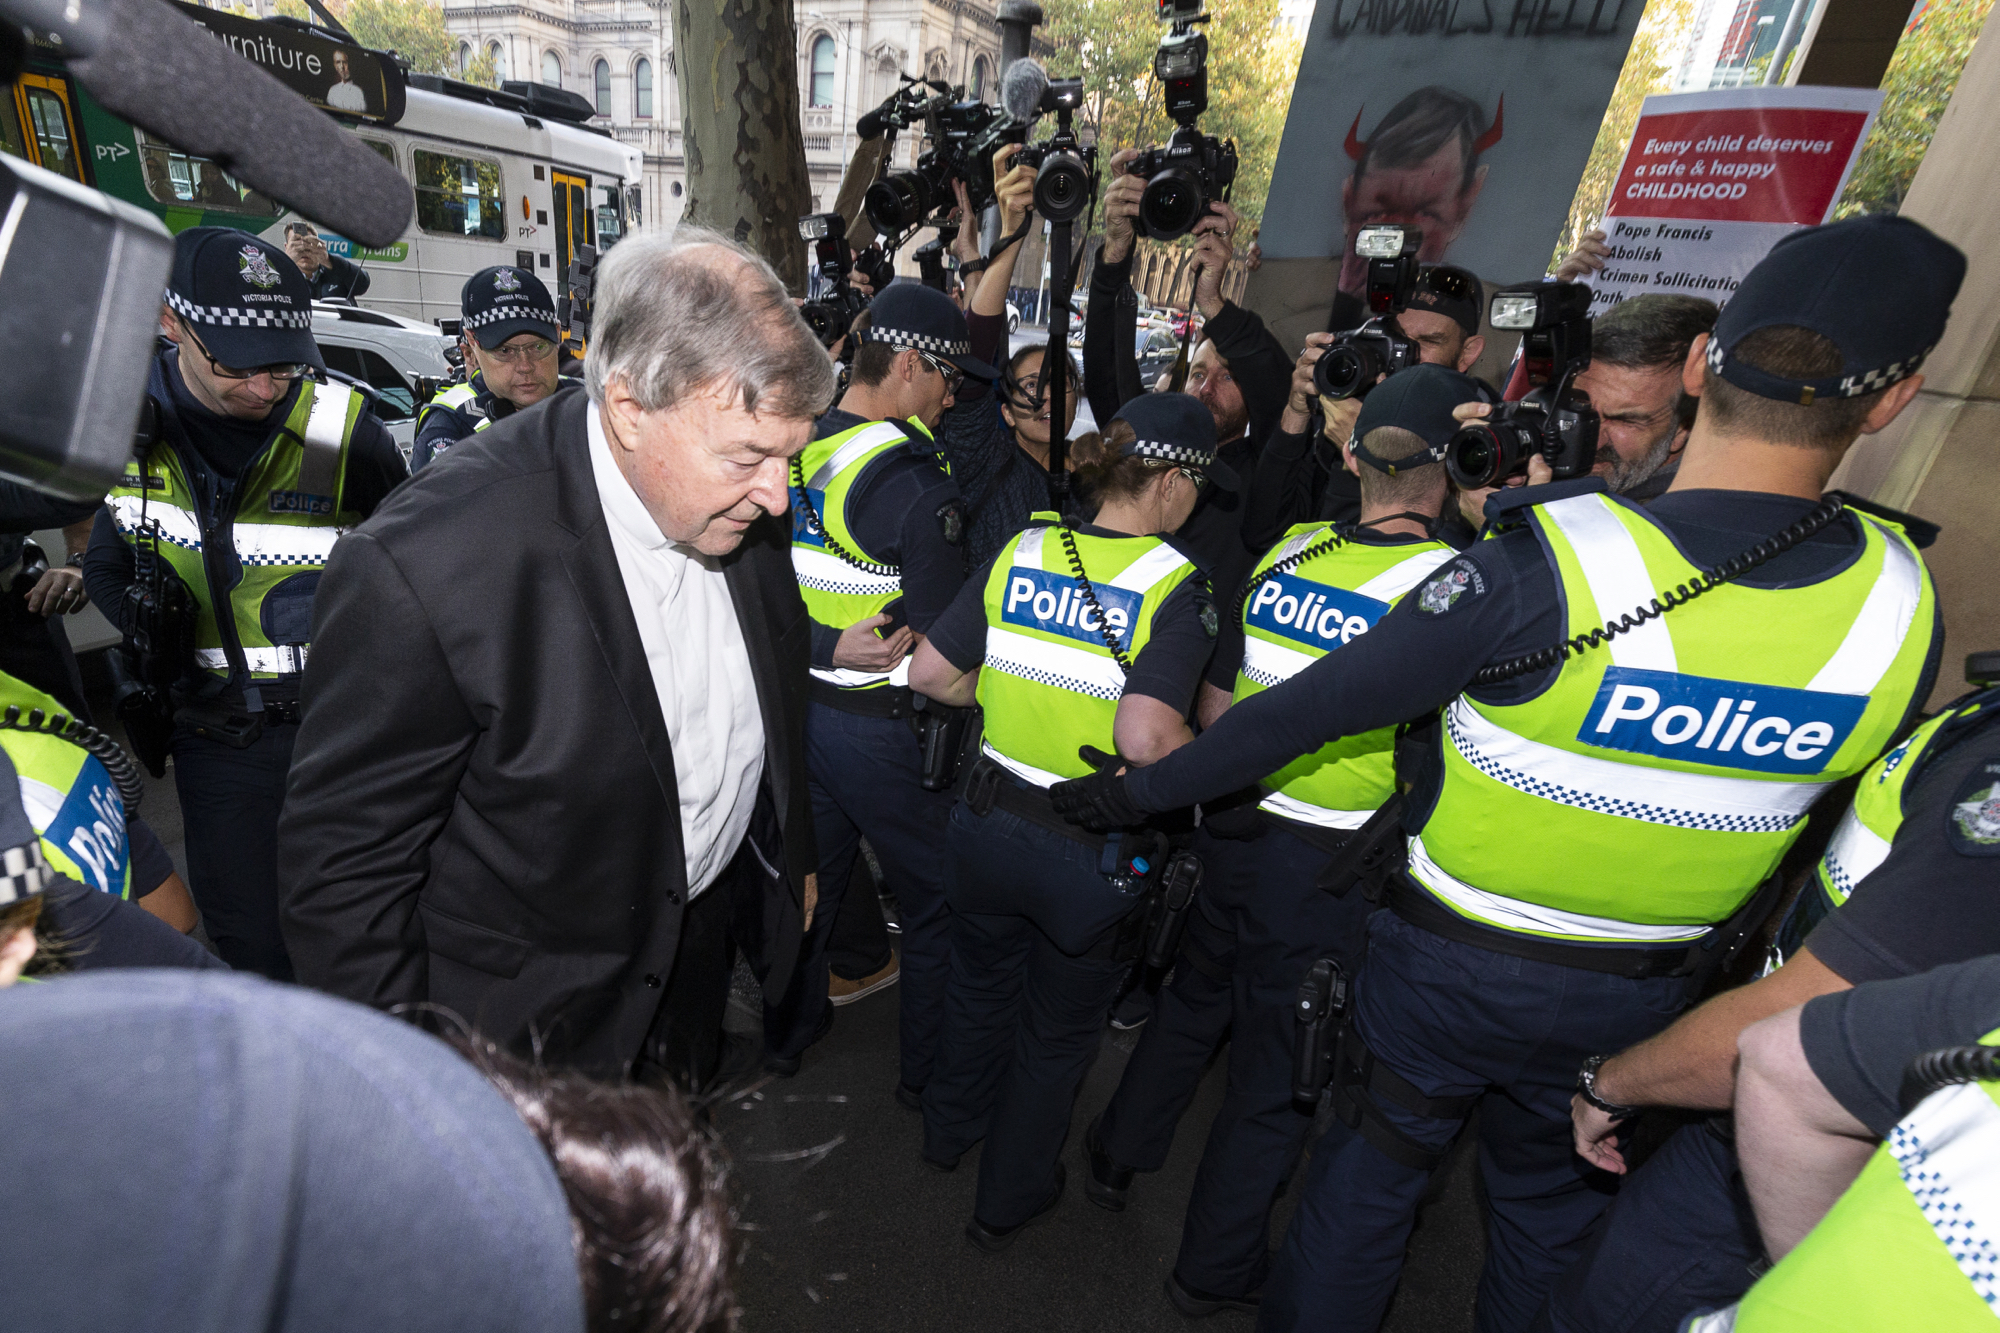 Cardinal Pell to face trial on several charges of sexual assault